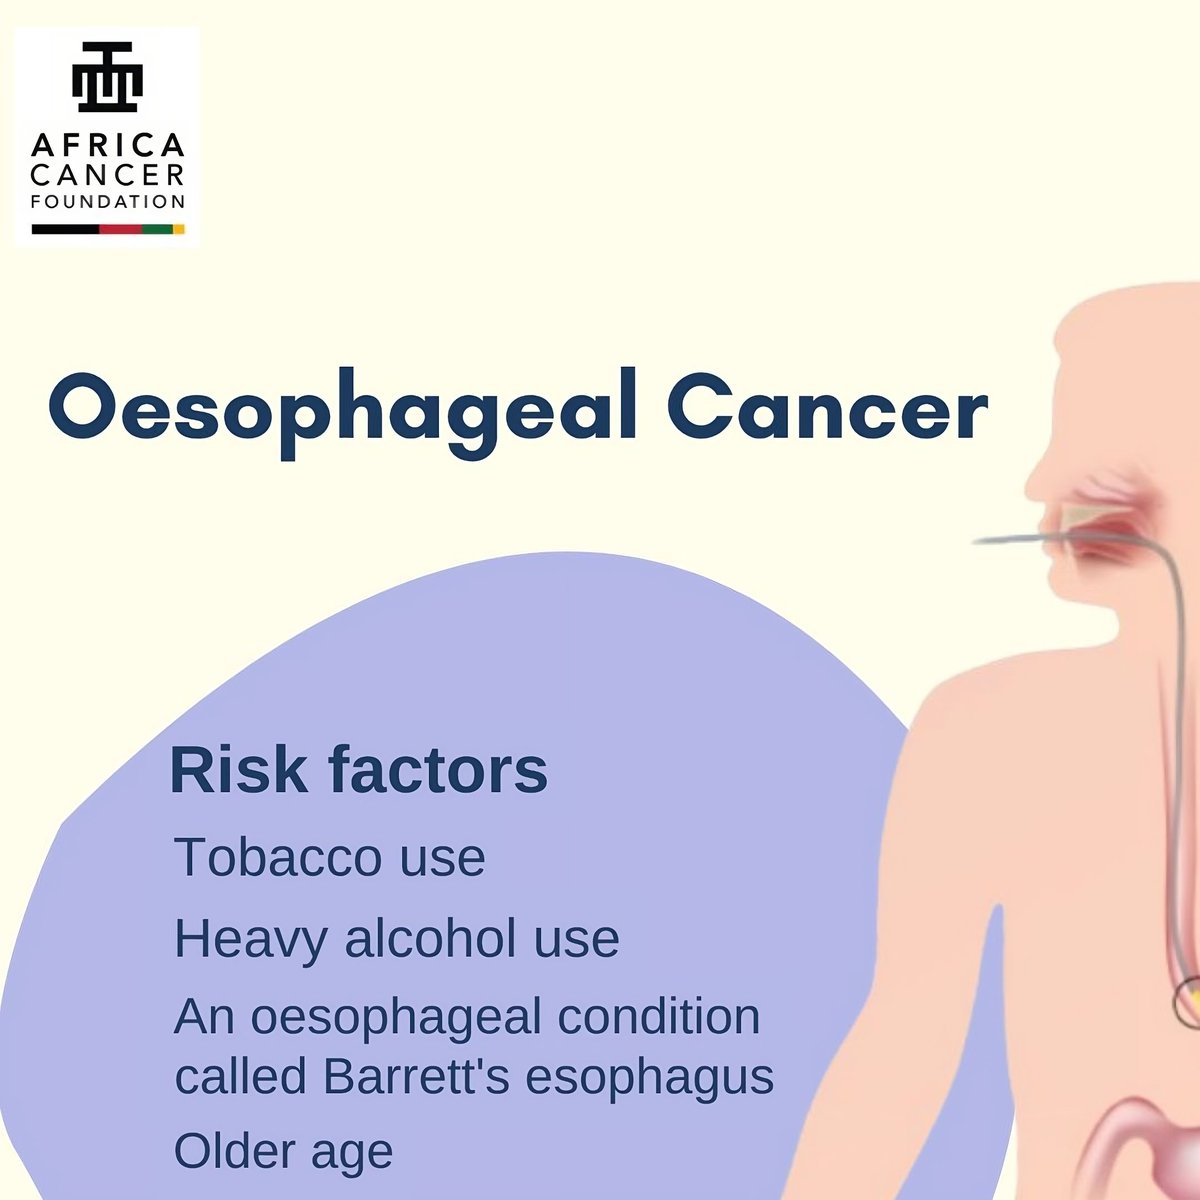 Smoking, heavy alcohol use, and Barrett oesophagus can increase the risk of #oesophagealcancer. #ACancerFreeAfrica #BecauseWeCare